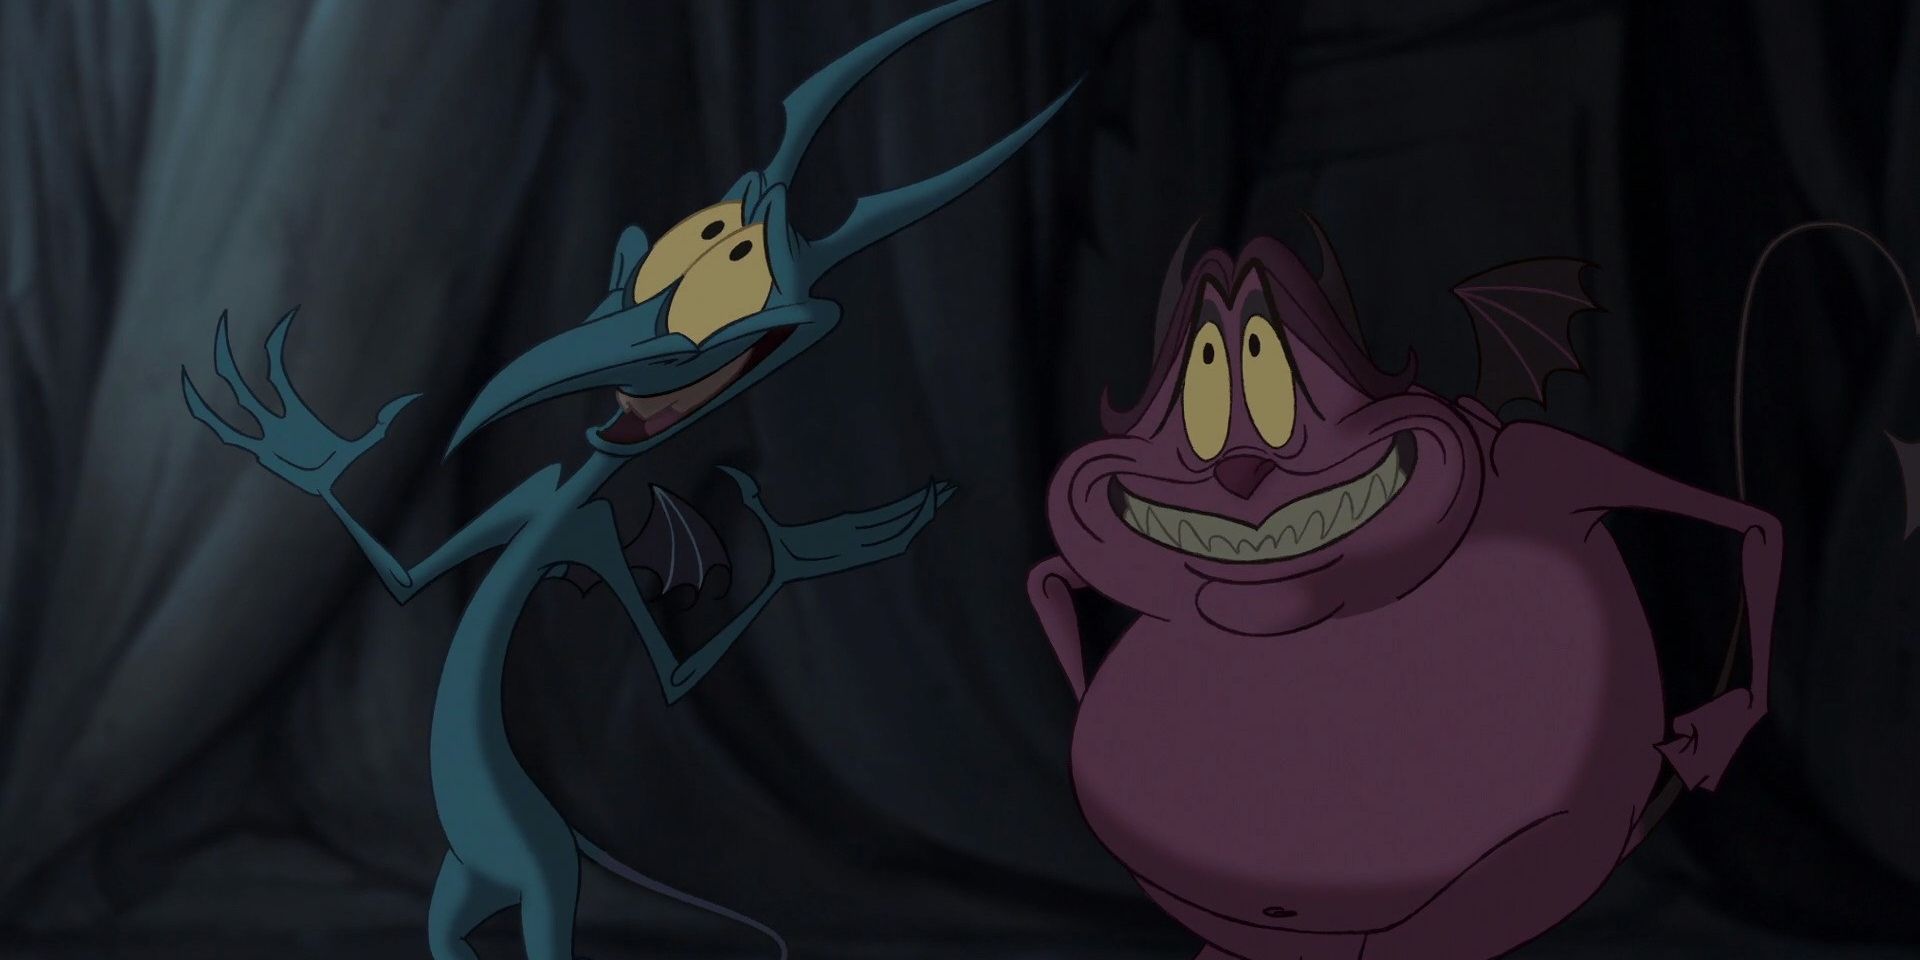 Pain and Panic from the Disney movie Hercules.